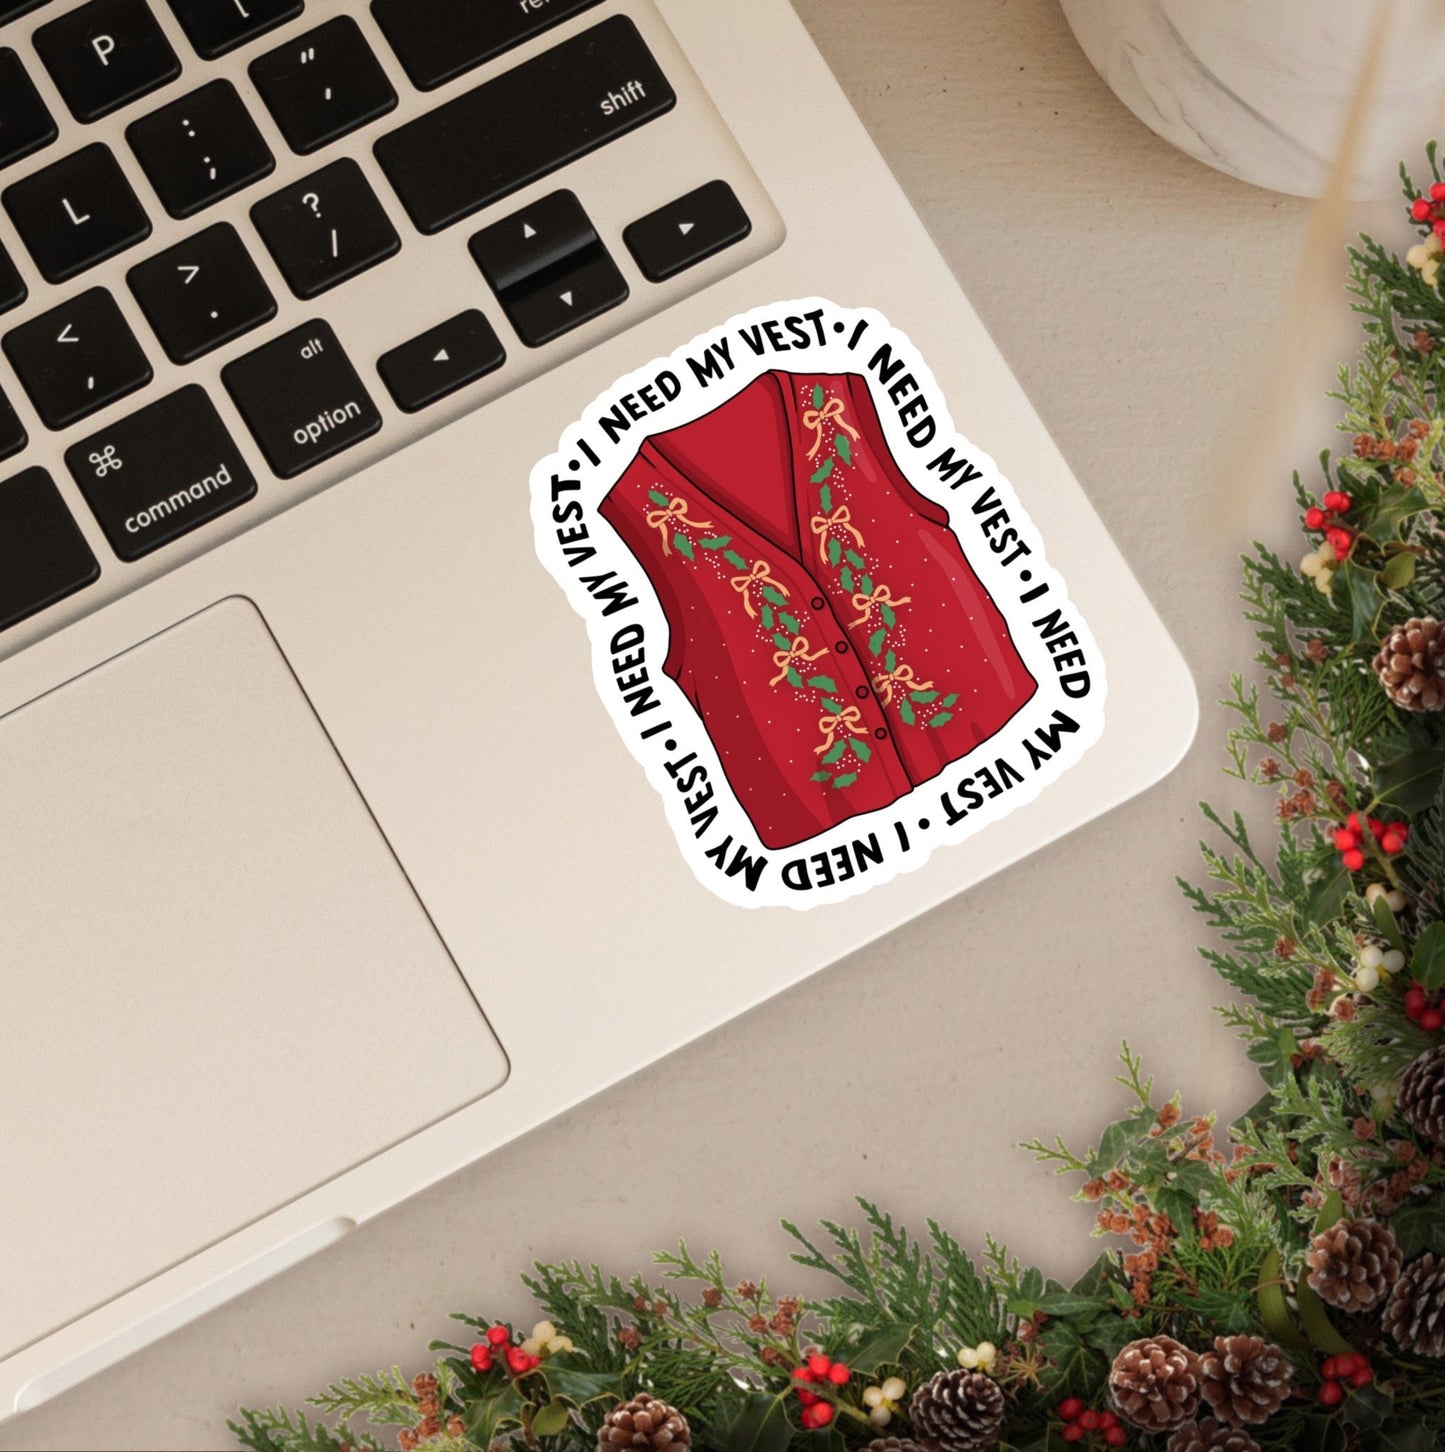 I Need My Vest, I Need My Vest, I Need My Vest! | Christmas with the Kranks Stickers